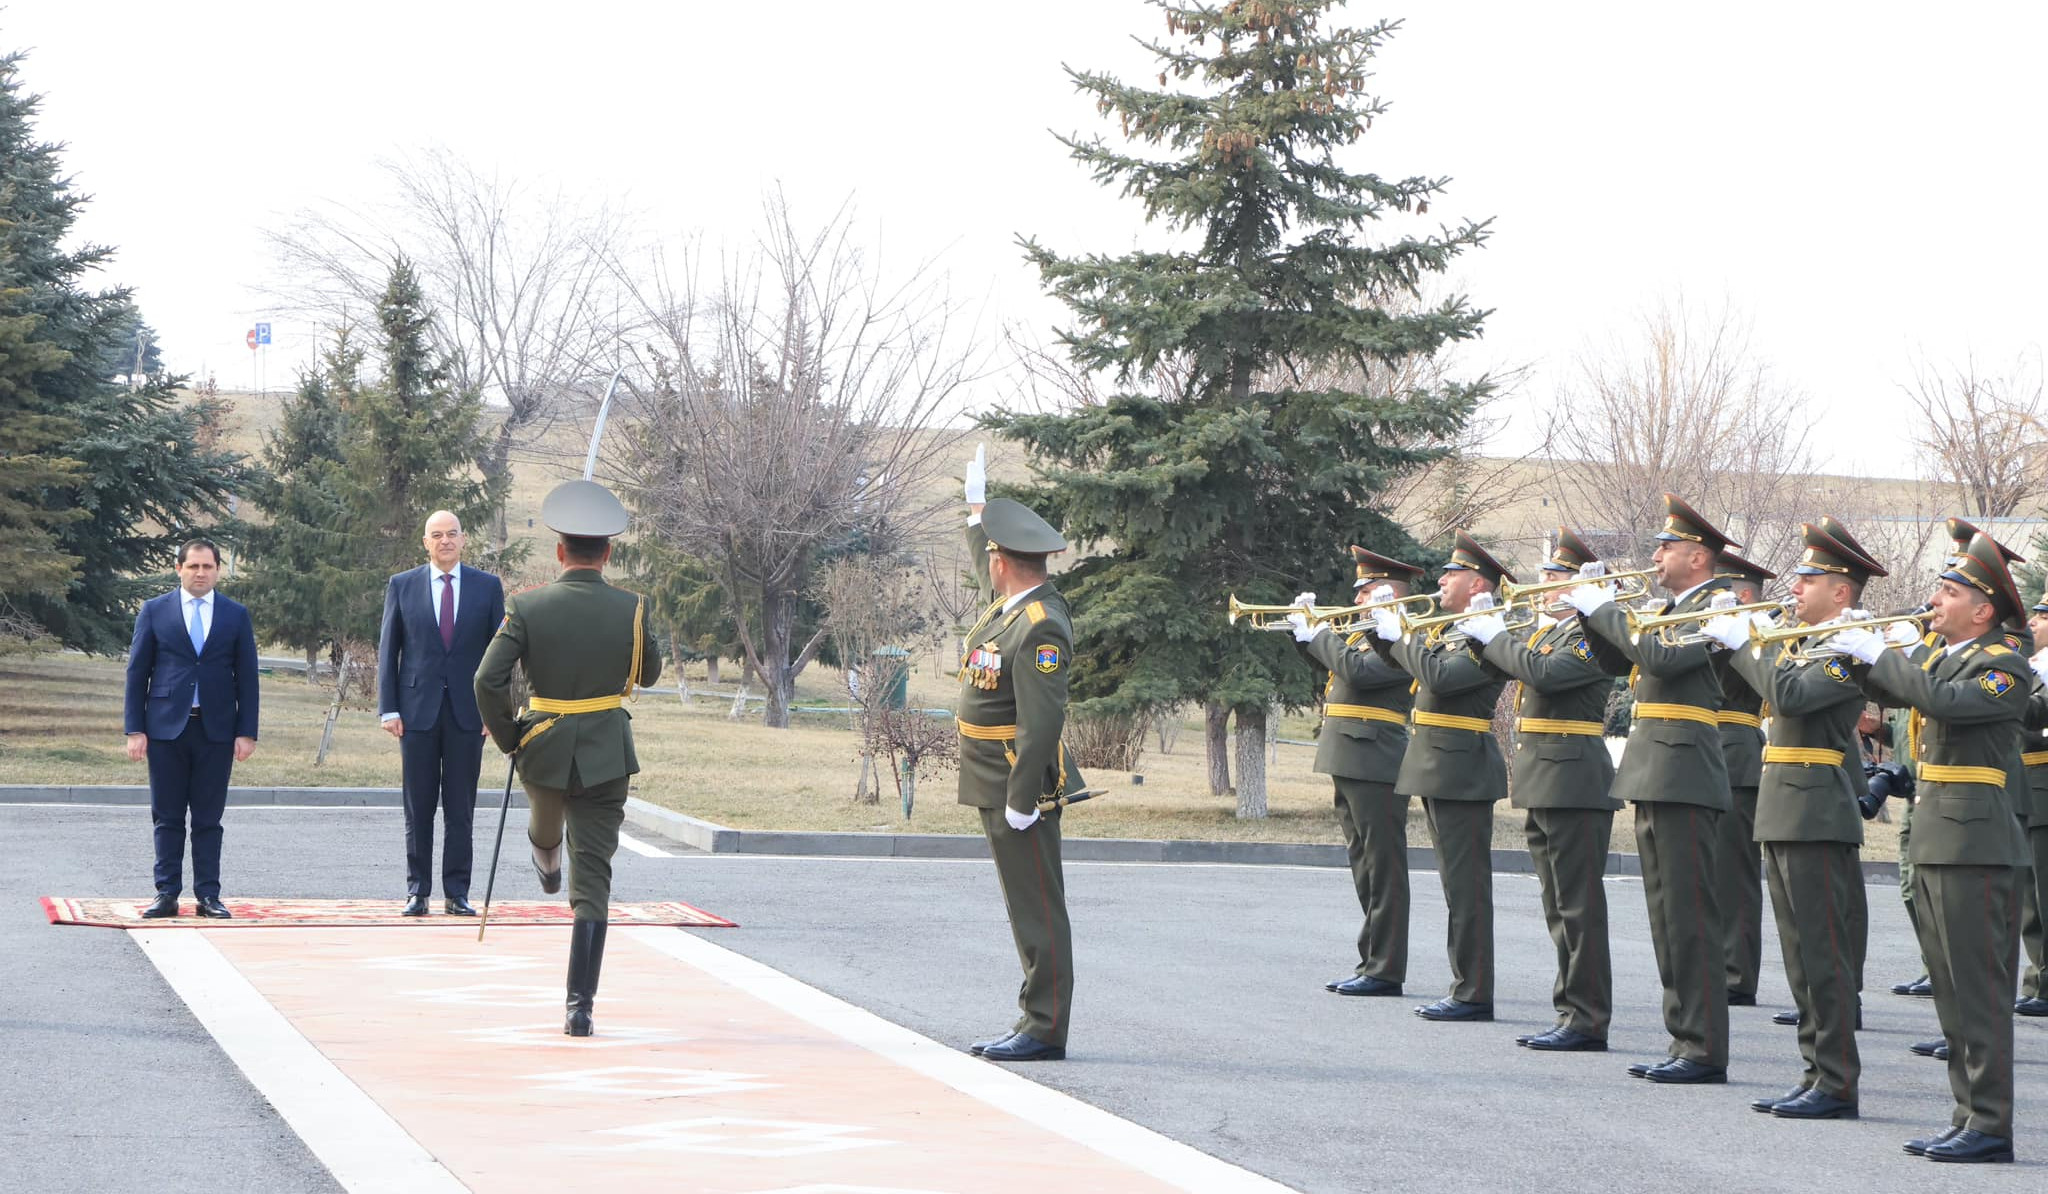 Reception ceremony of Nikolaos Dendias took place in administrative complex of Ministry of Defense